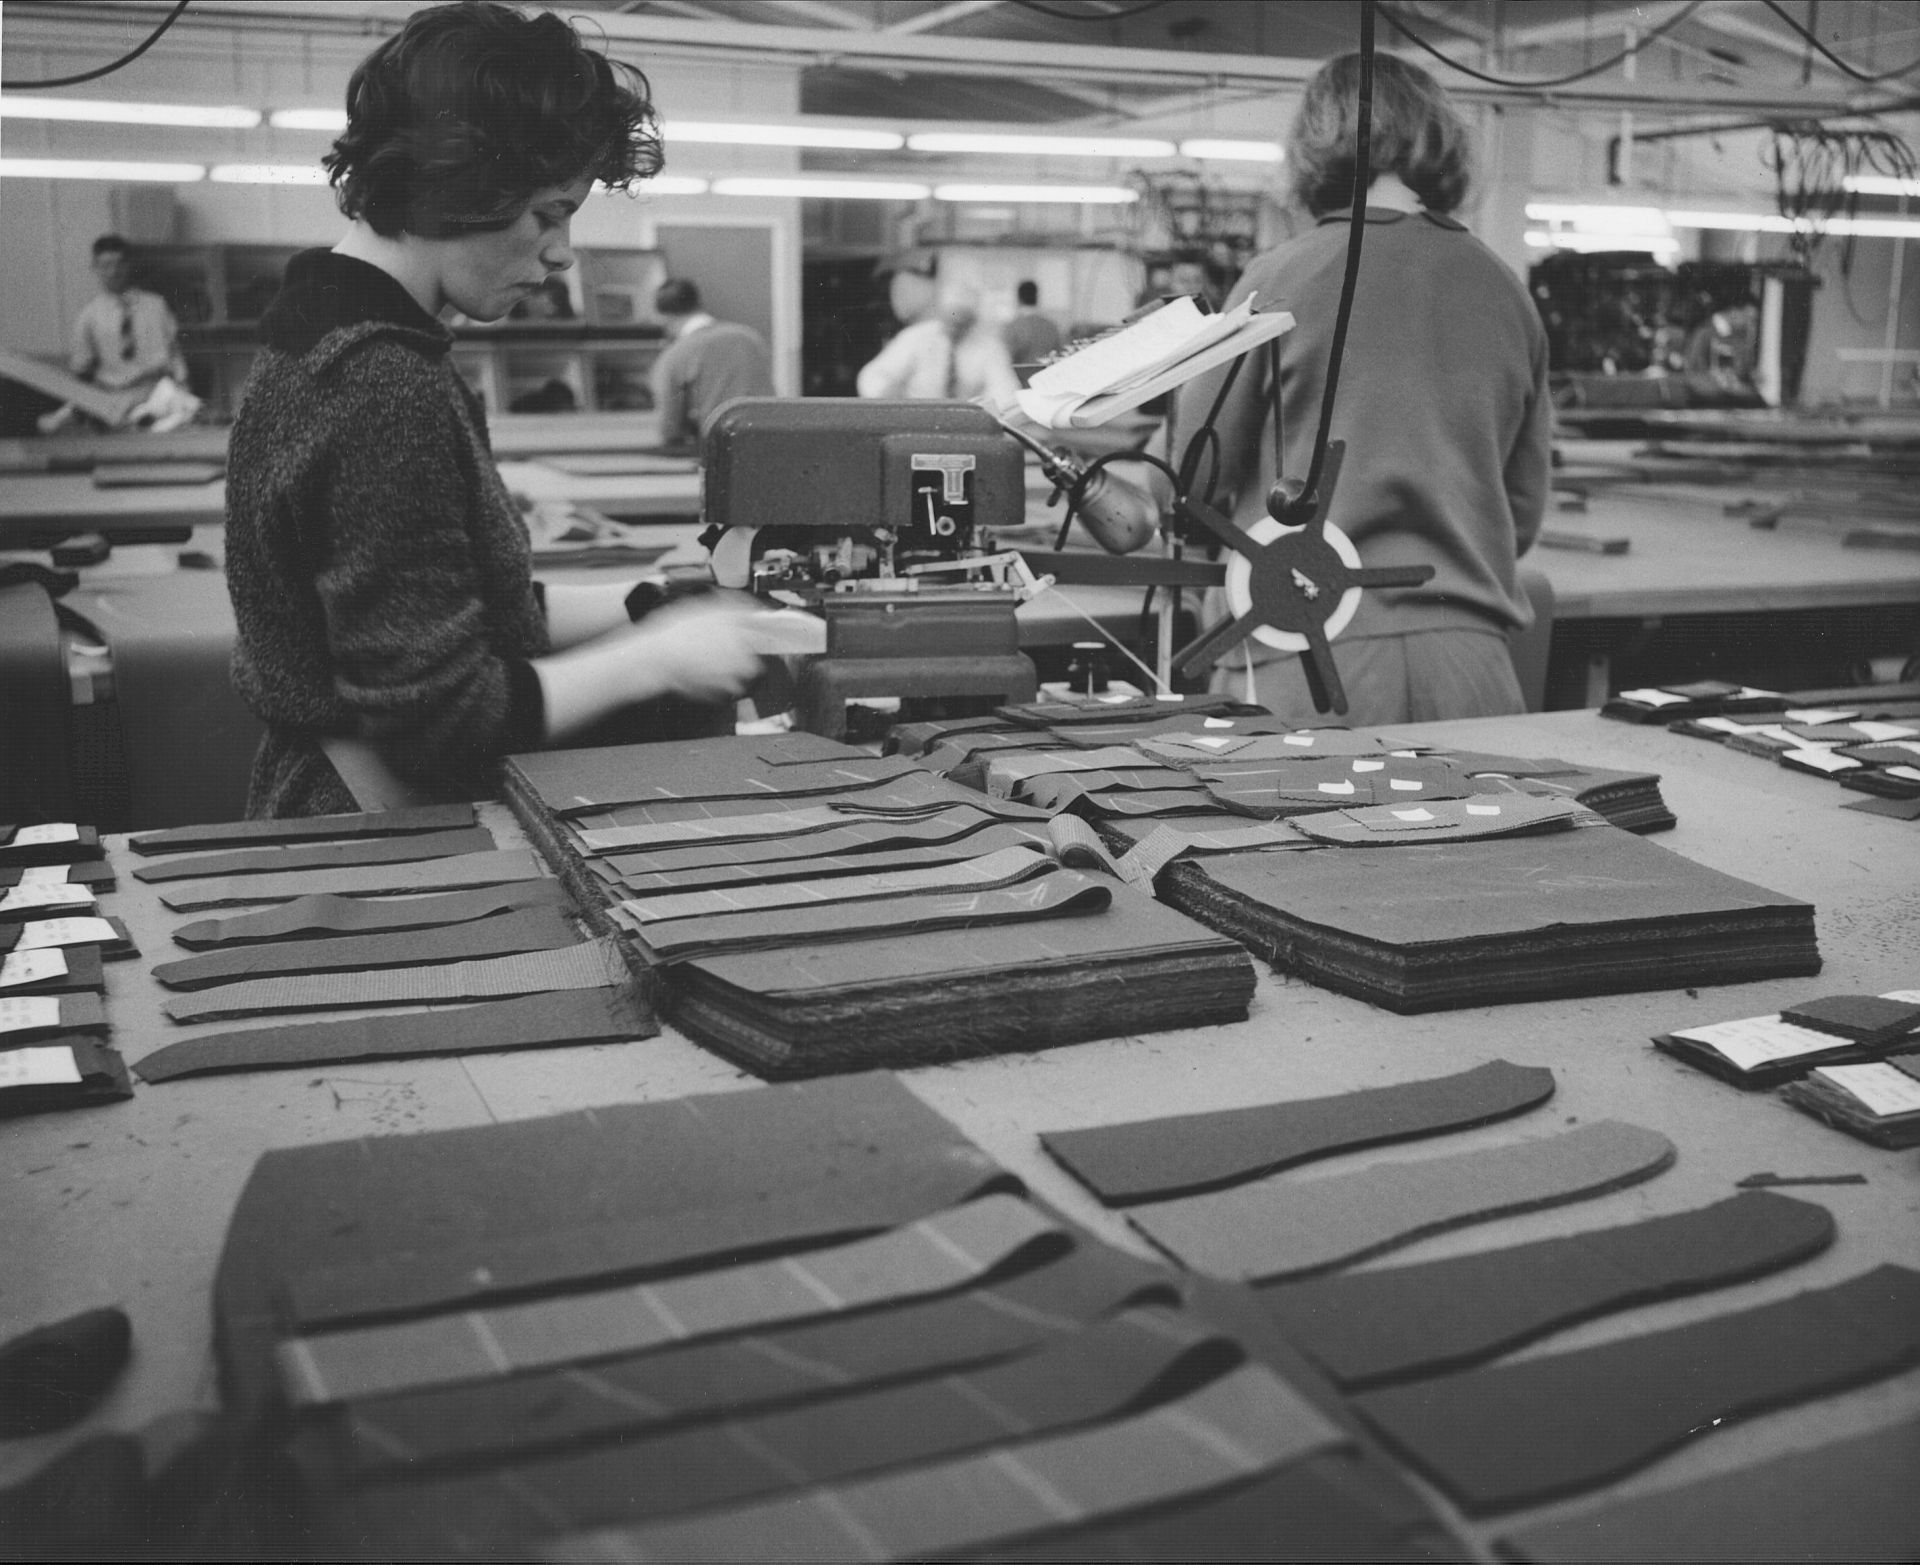 Work Preparation section of FJs.  All cut work passed through this section to be prepared in various ways for the production lines.  Improving manufacturing processes such as these was part of the FJ Methods Engineers' KISS  research!  Photo: Jones Family Collection.  